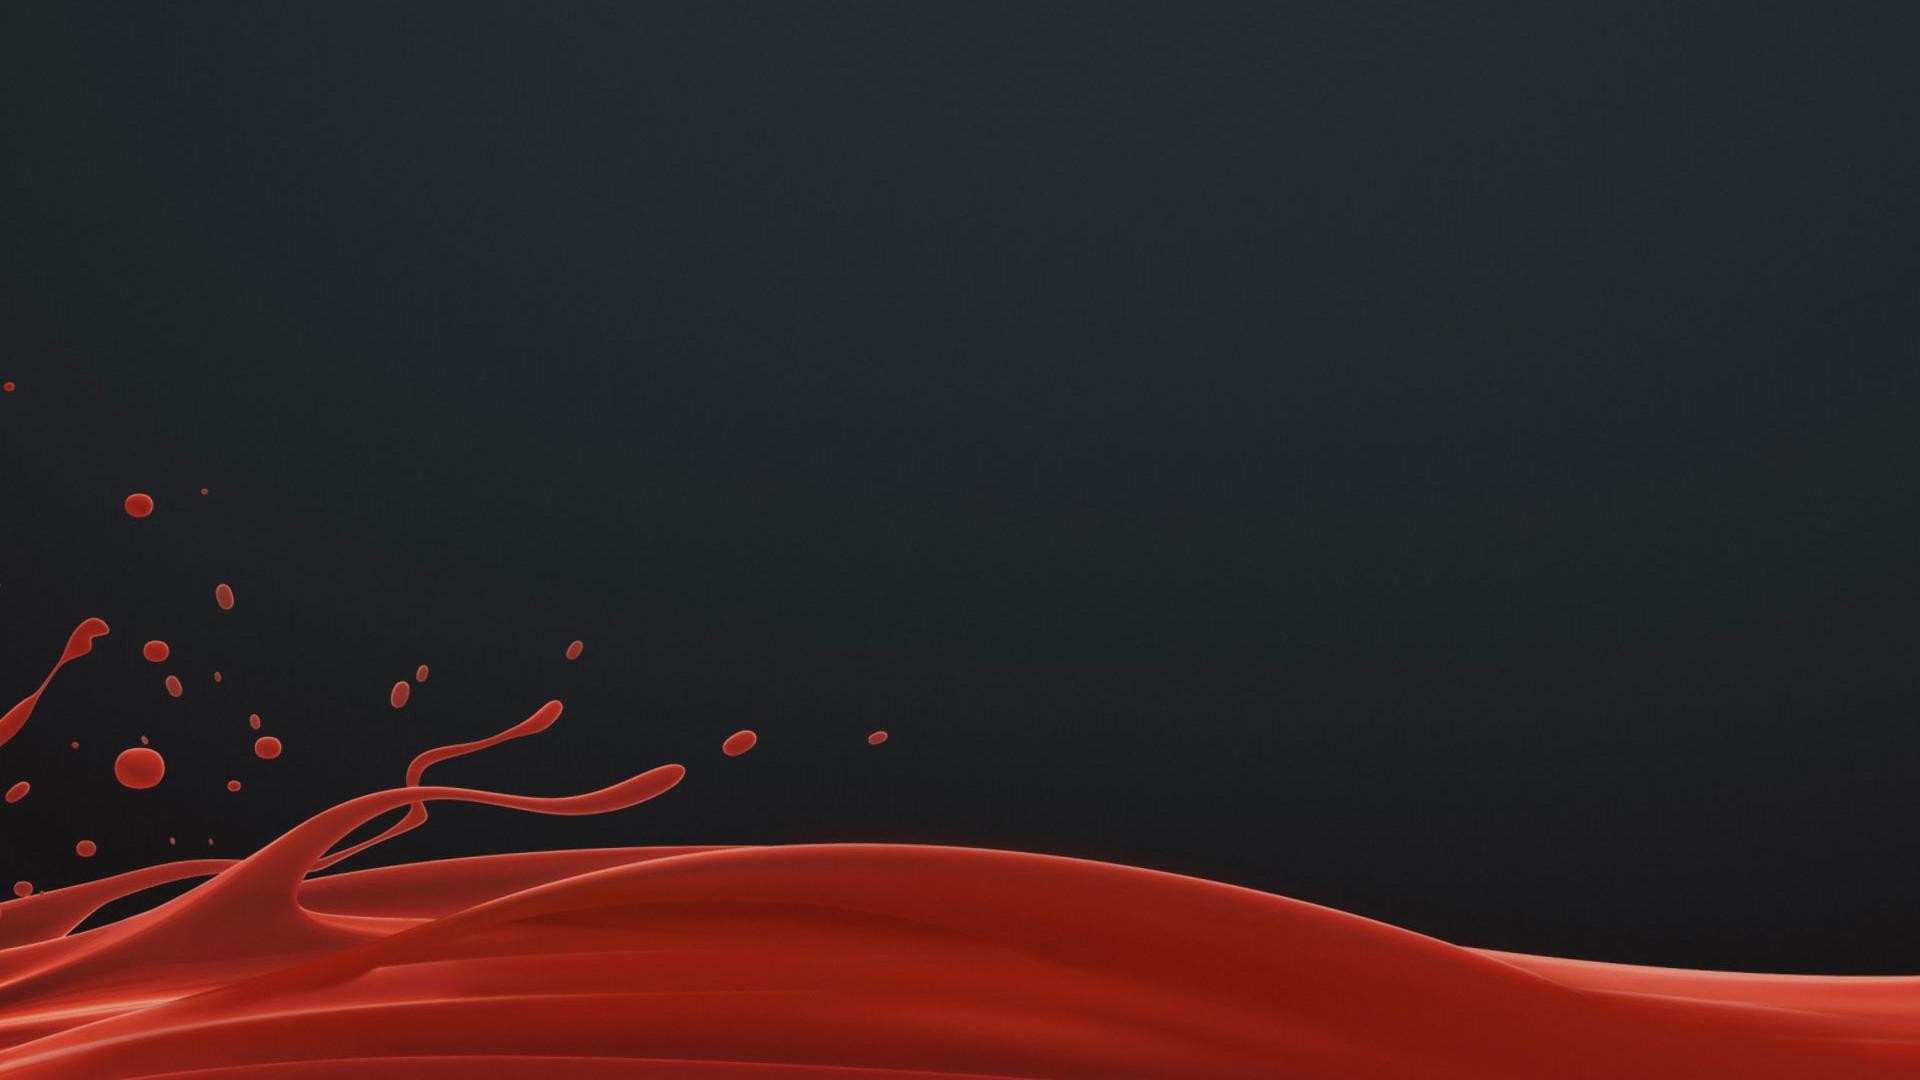 1920x1080  red abstract wallpaper wide wallpapers:1280x800,1440x900,1680x1050  - hd backgrounds: